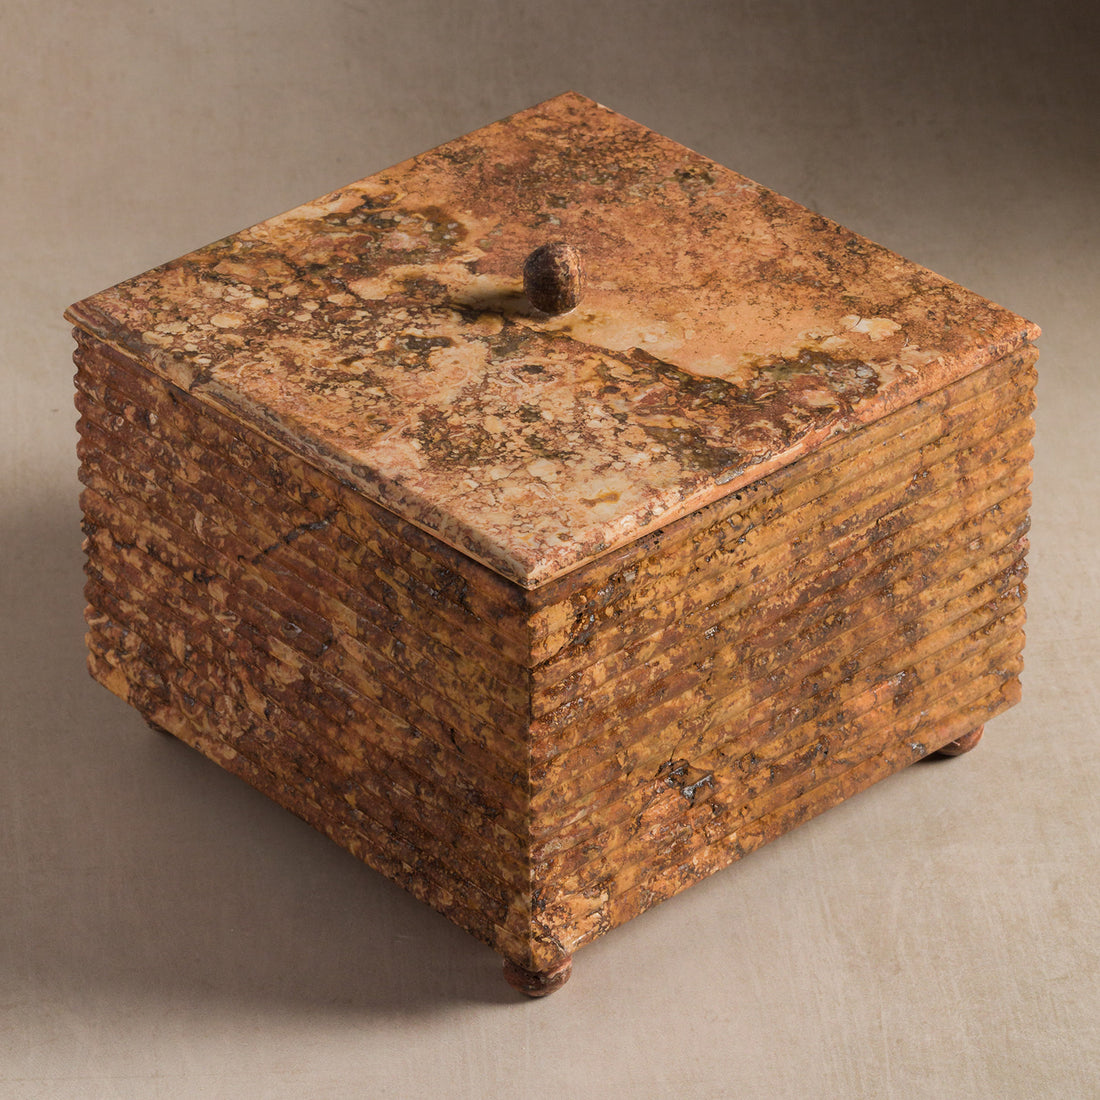 Studio H Collection Juno Ribbed Square Stone Box with Lid - Rust Travertine